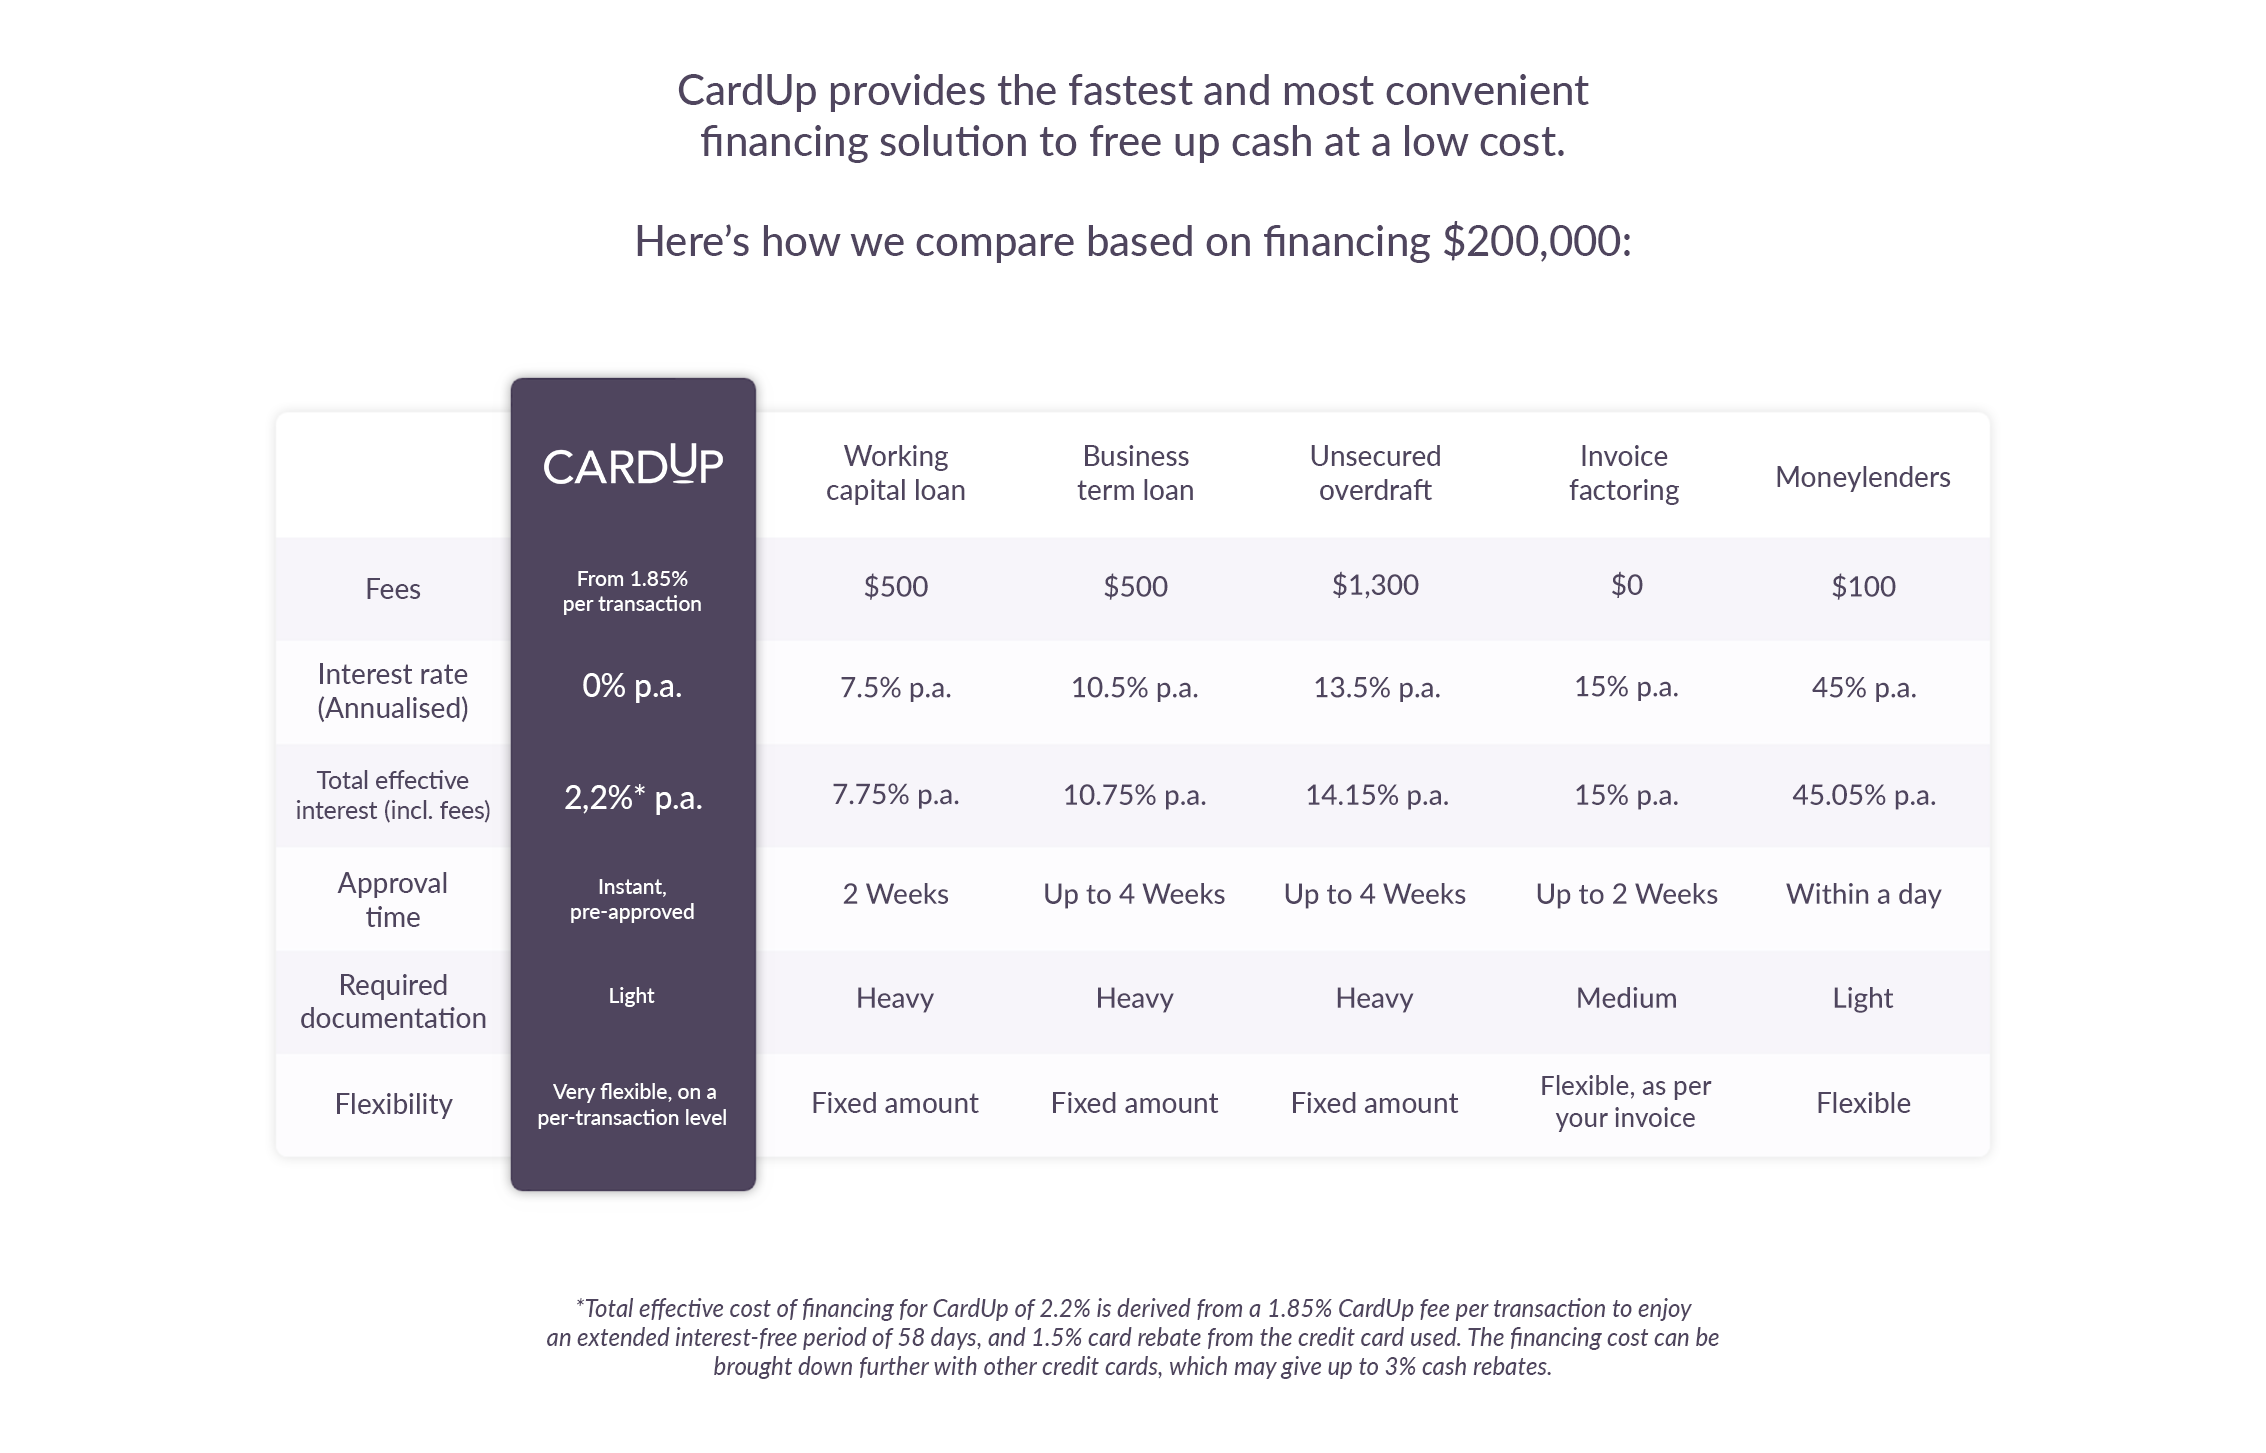 Comparison chart on different cost of financing: CardUp, Working Capital loan, business term loan, Unsecured overdraft, Invoice factoring, Moneylenders